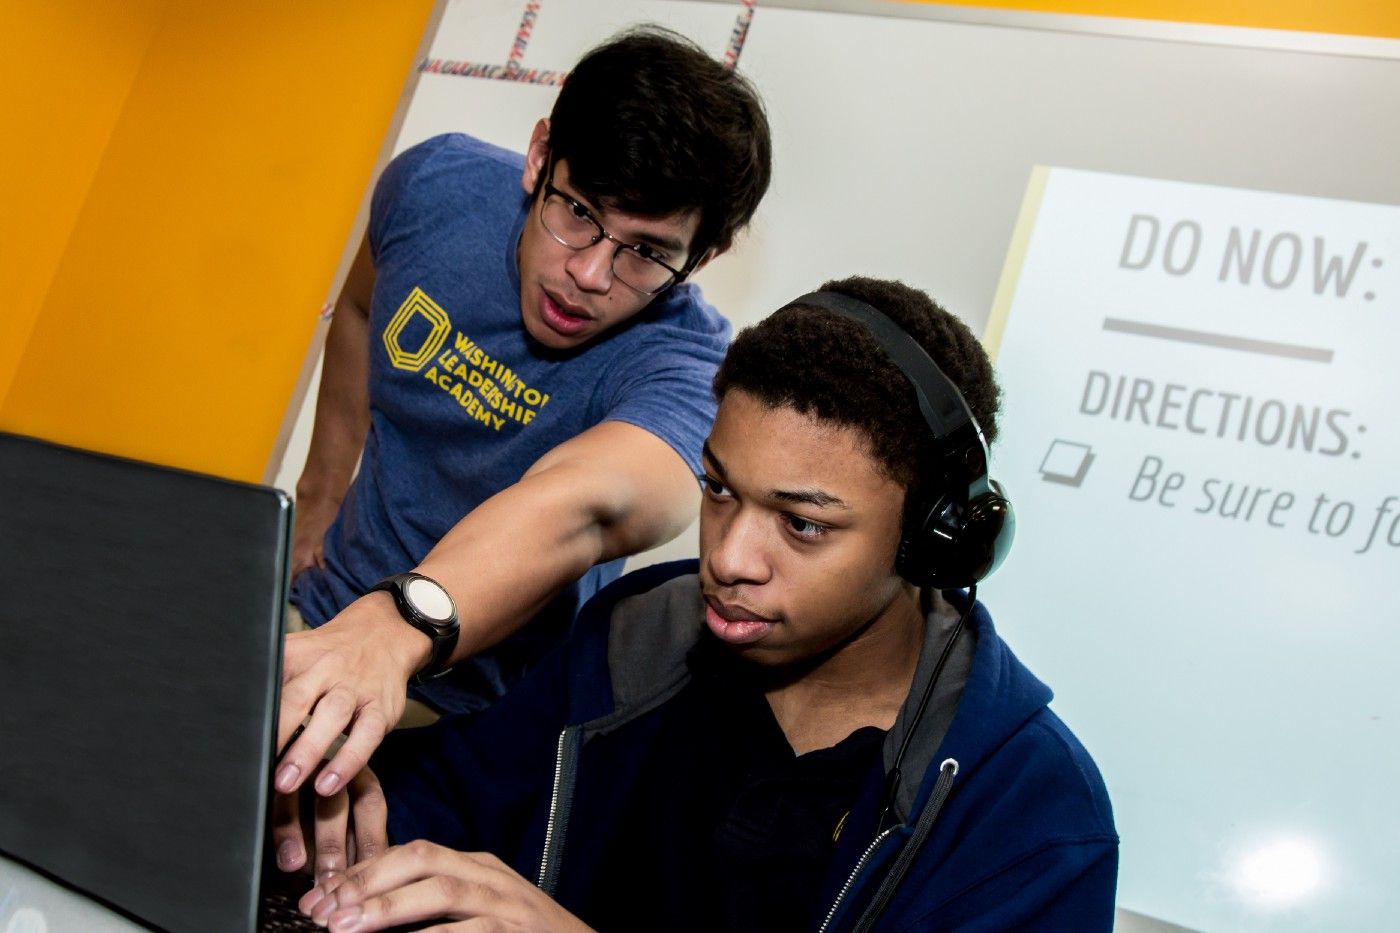 Two students collaborating on a laptop.